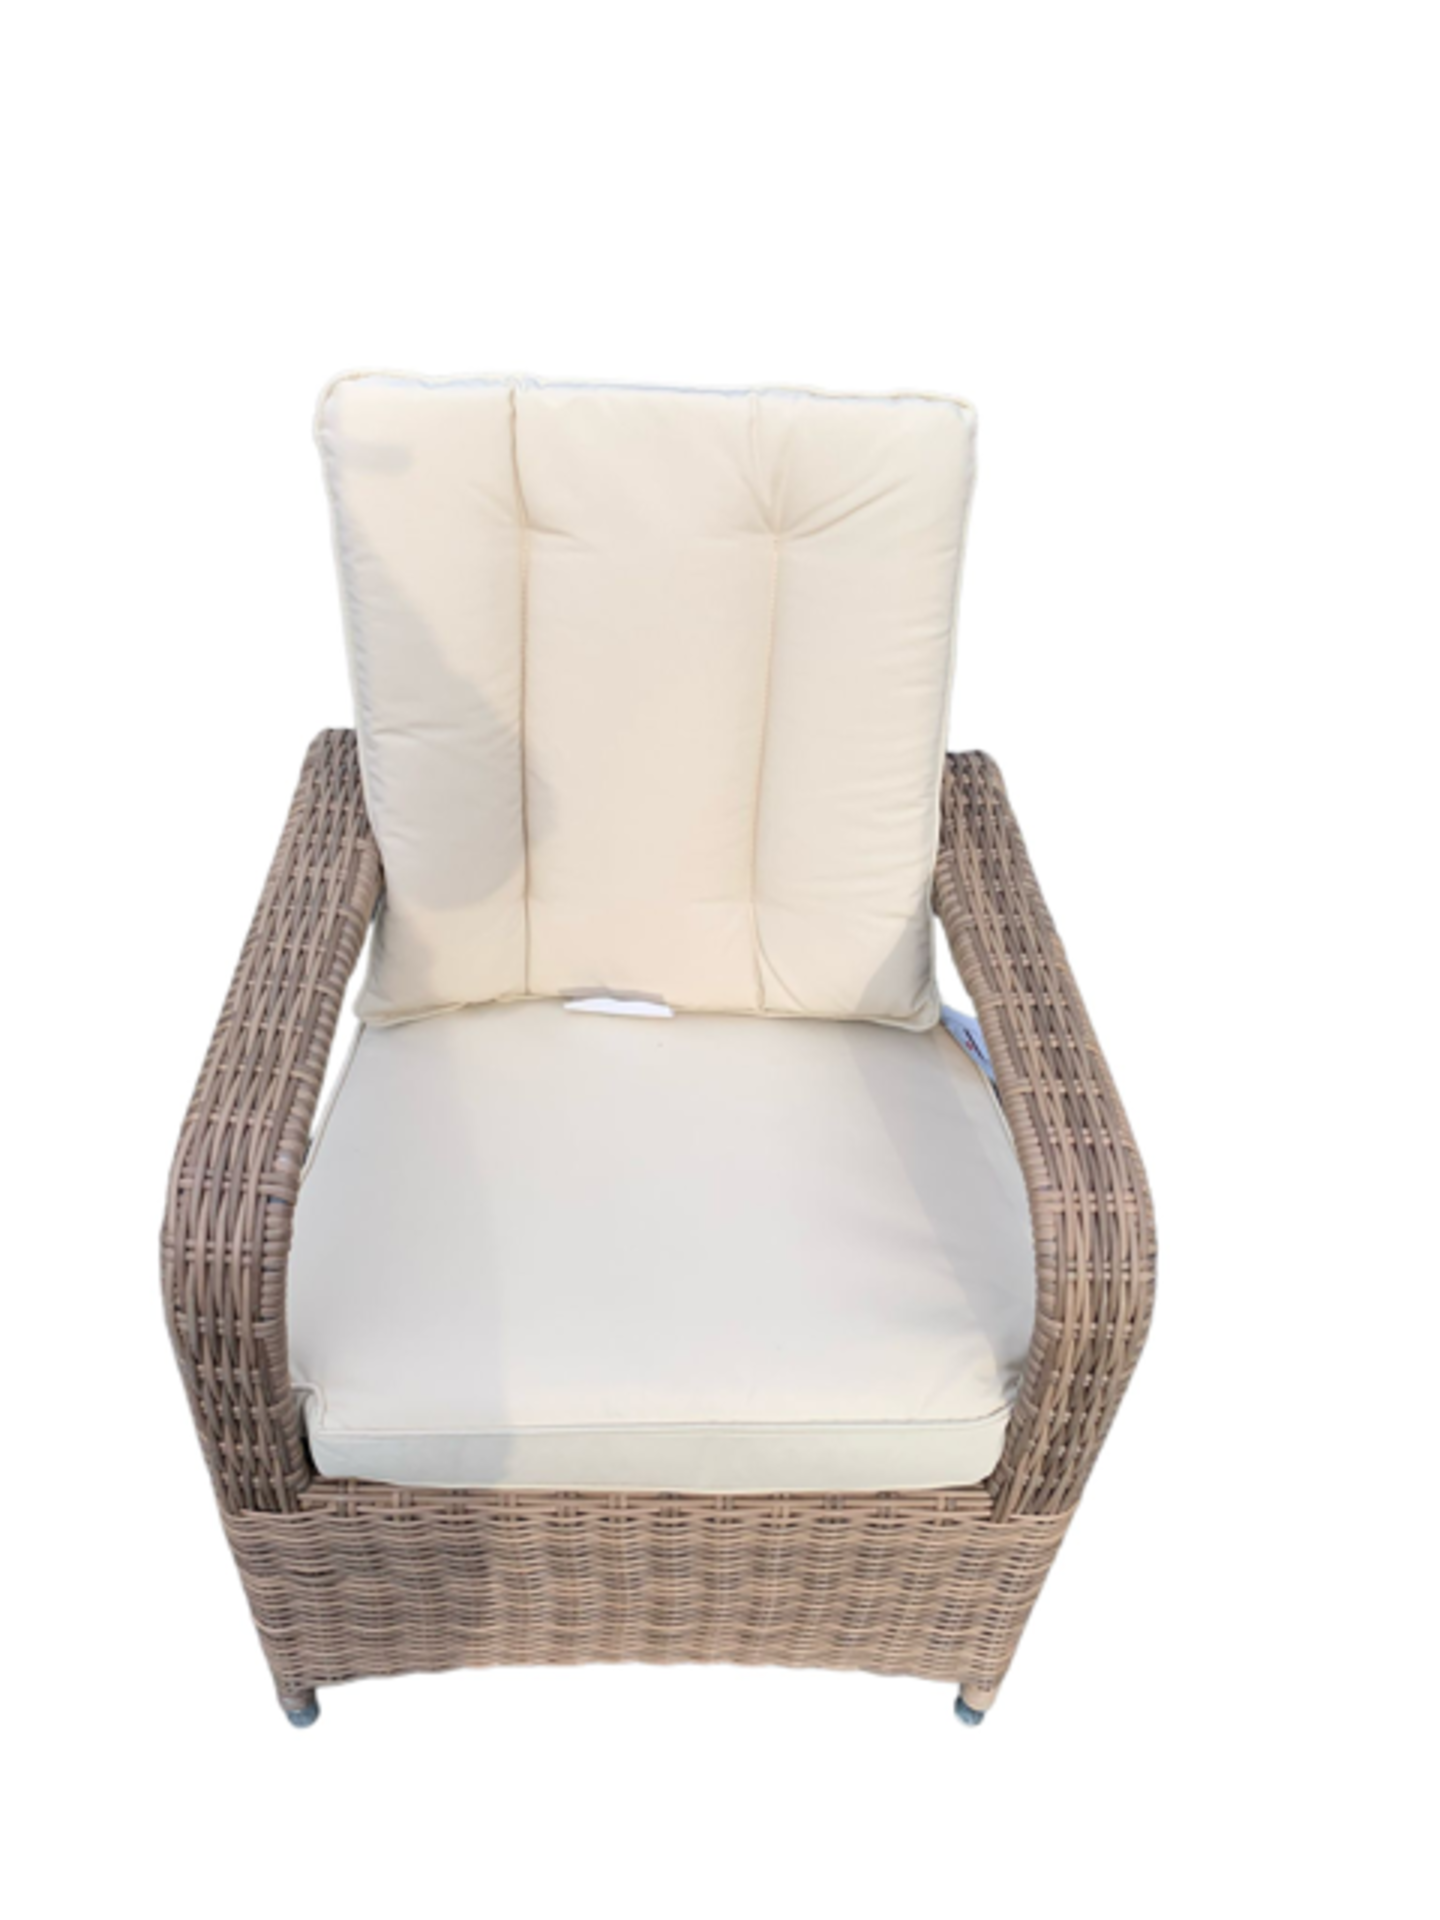 BRAND NEW 4 SEATER ROUND RATTAN DINING TABLE SET WITH ICE BUCKET AND WEATHER PROOF RAIN COVER. - Image 3 of 6